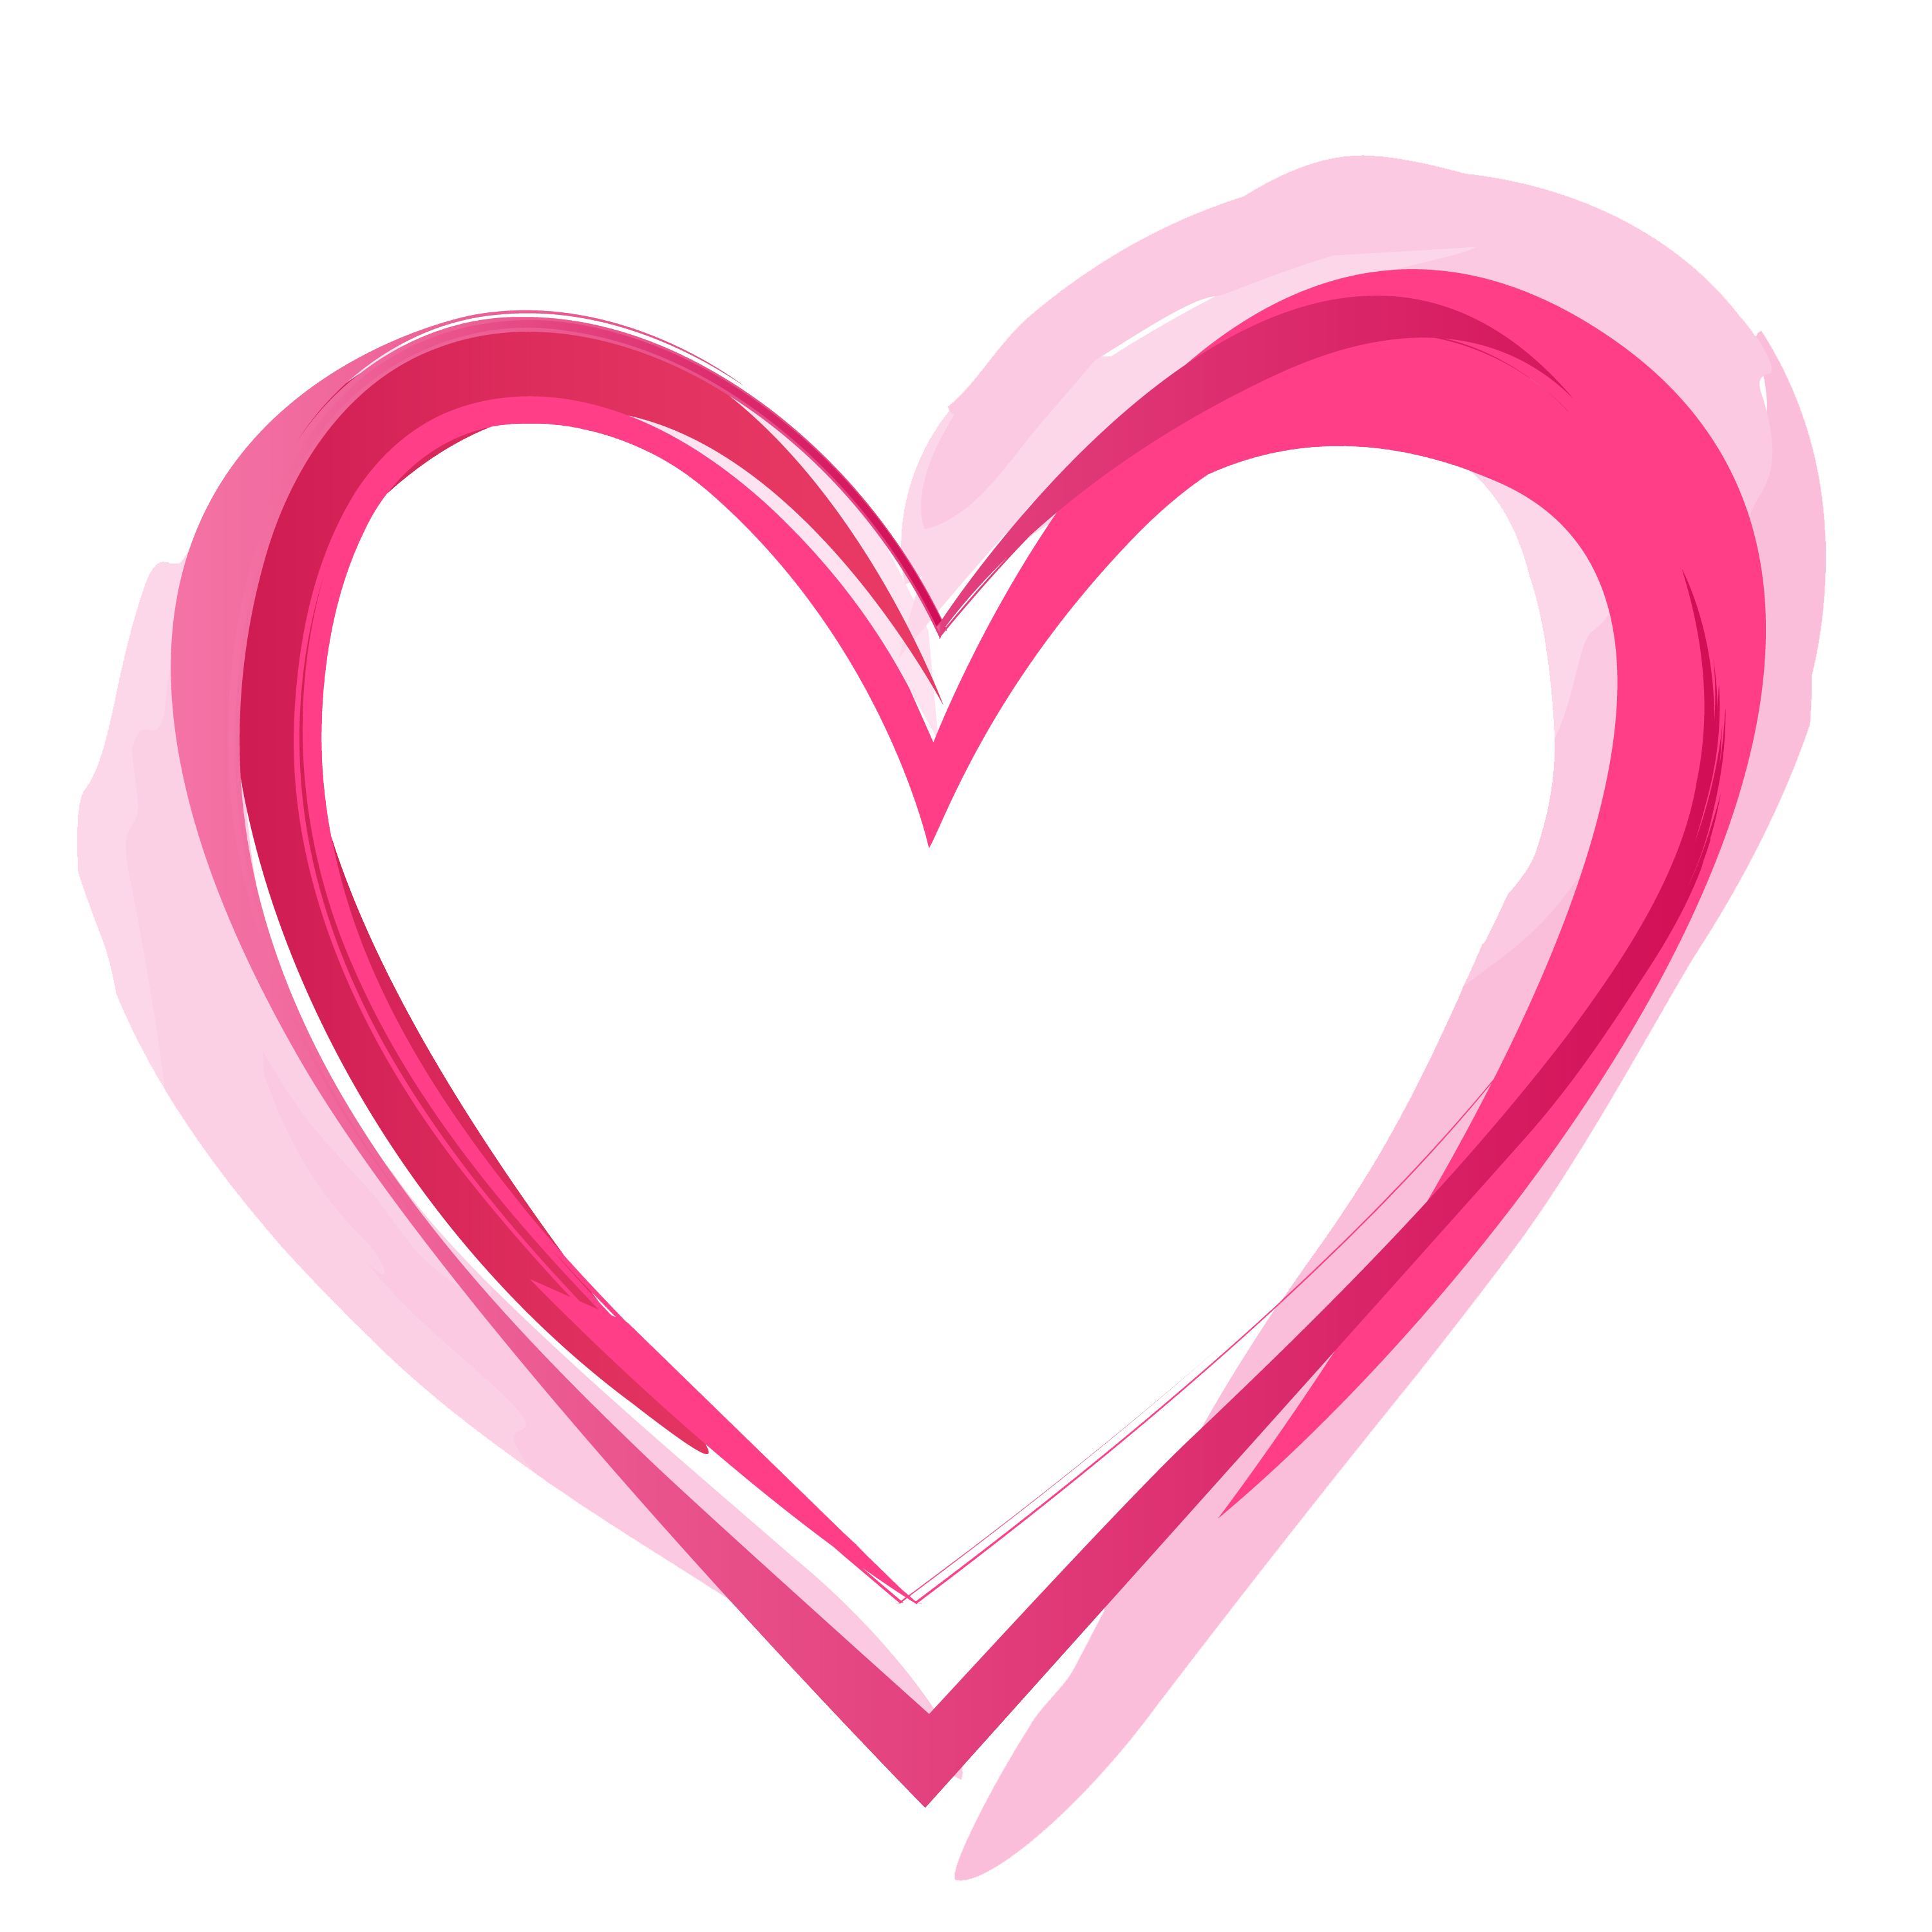 Heart Clip art Pink Heart PNG Pic png download 3000*3000 Free